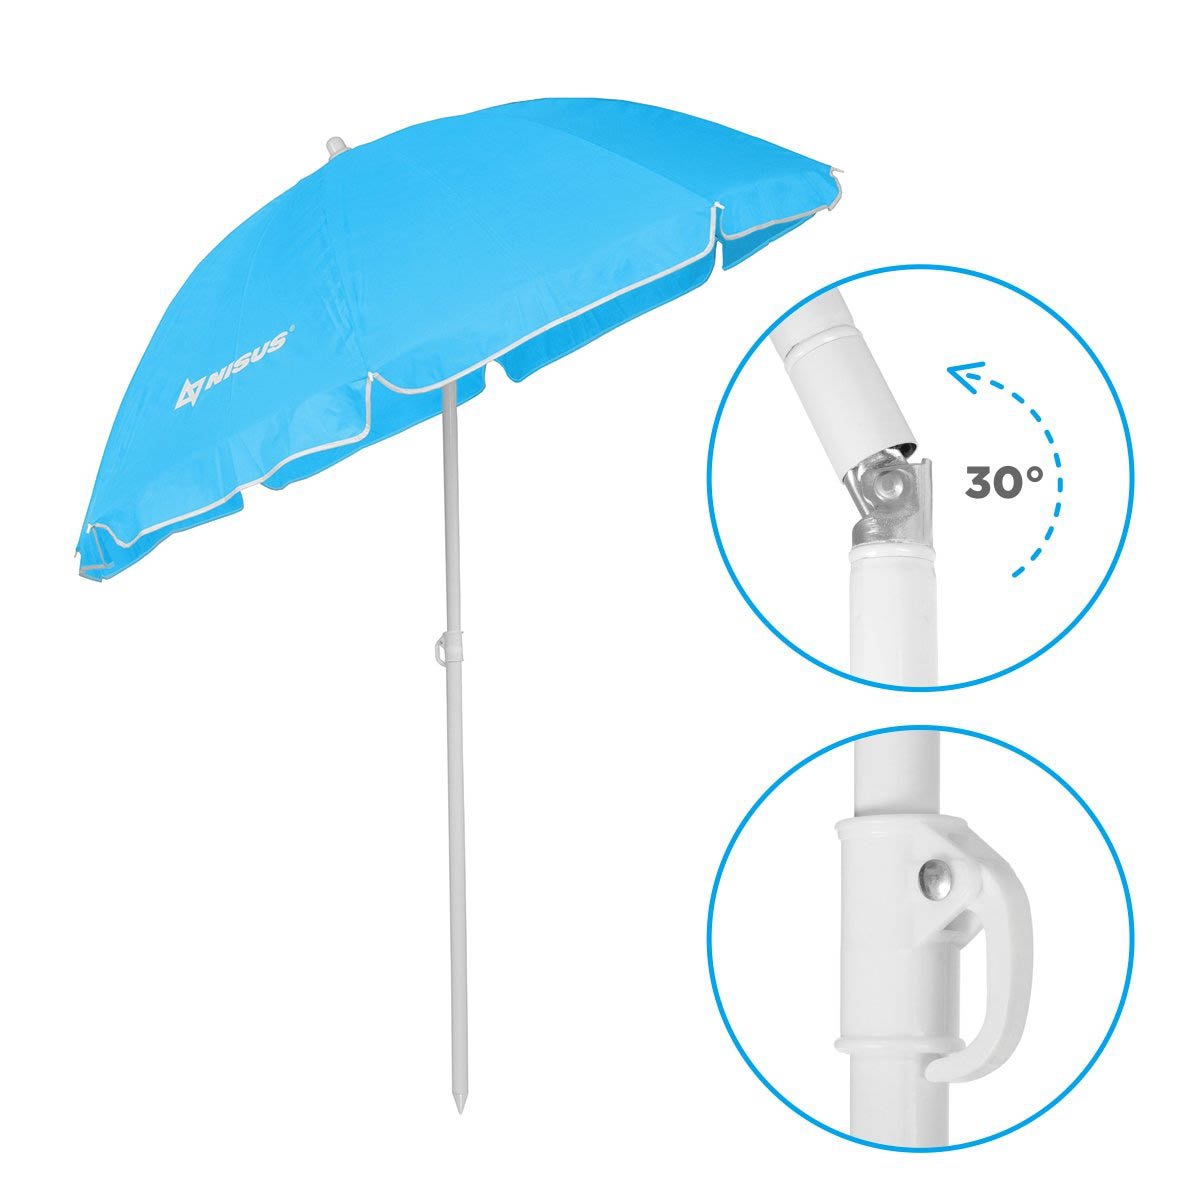 5 ft Sky Blue Tilting Beach Umbrella with Carry Bag featuring a 30 inclination degree